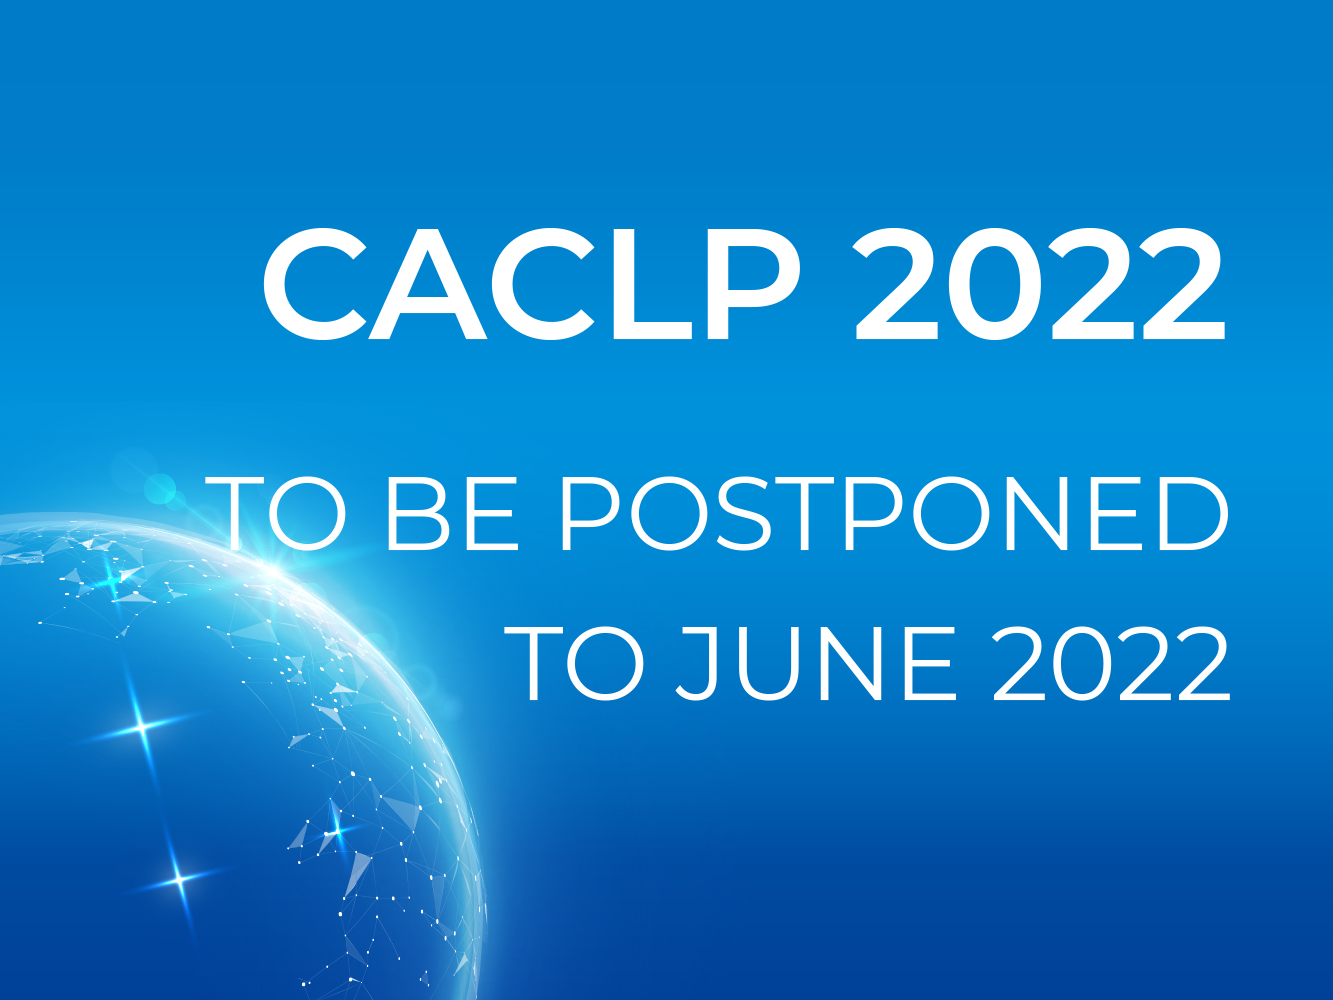 CACLP 2022 TO BE POSTPONED TO JUNE 2022